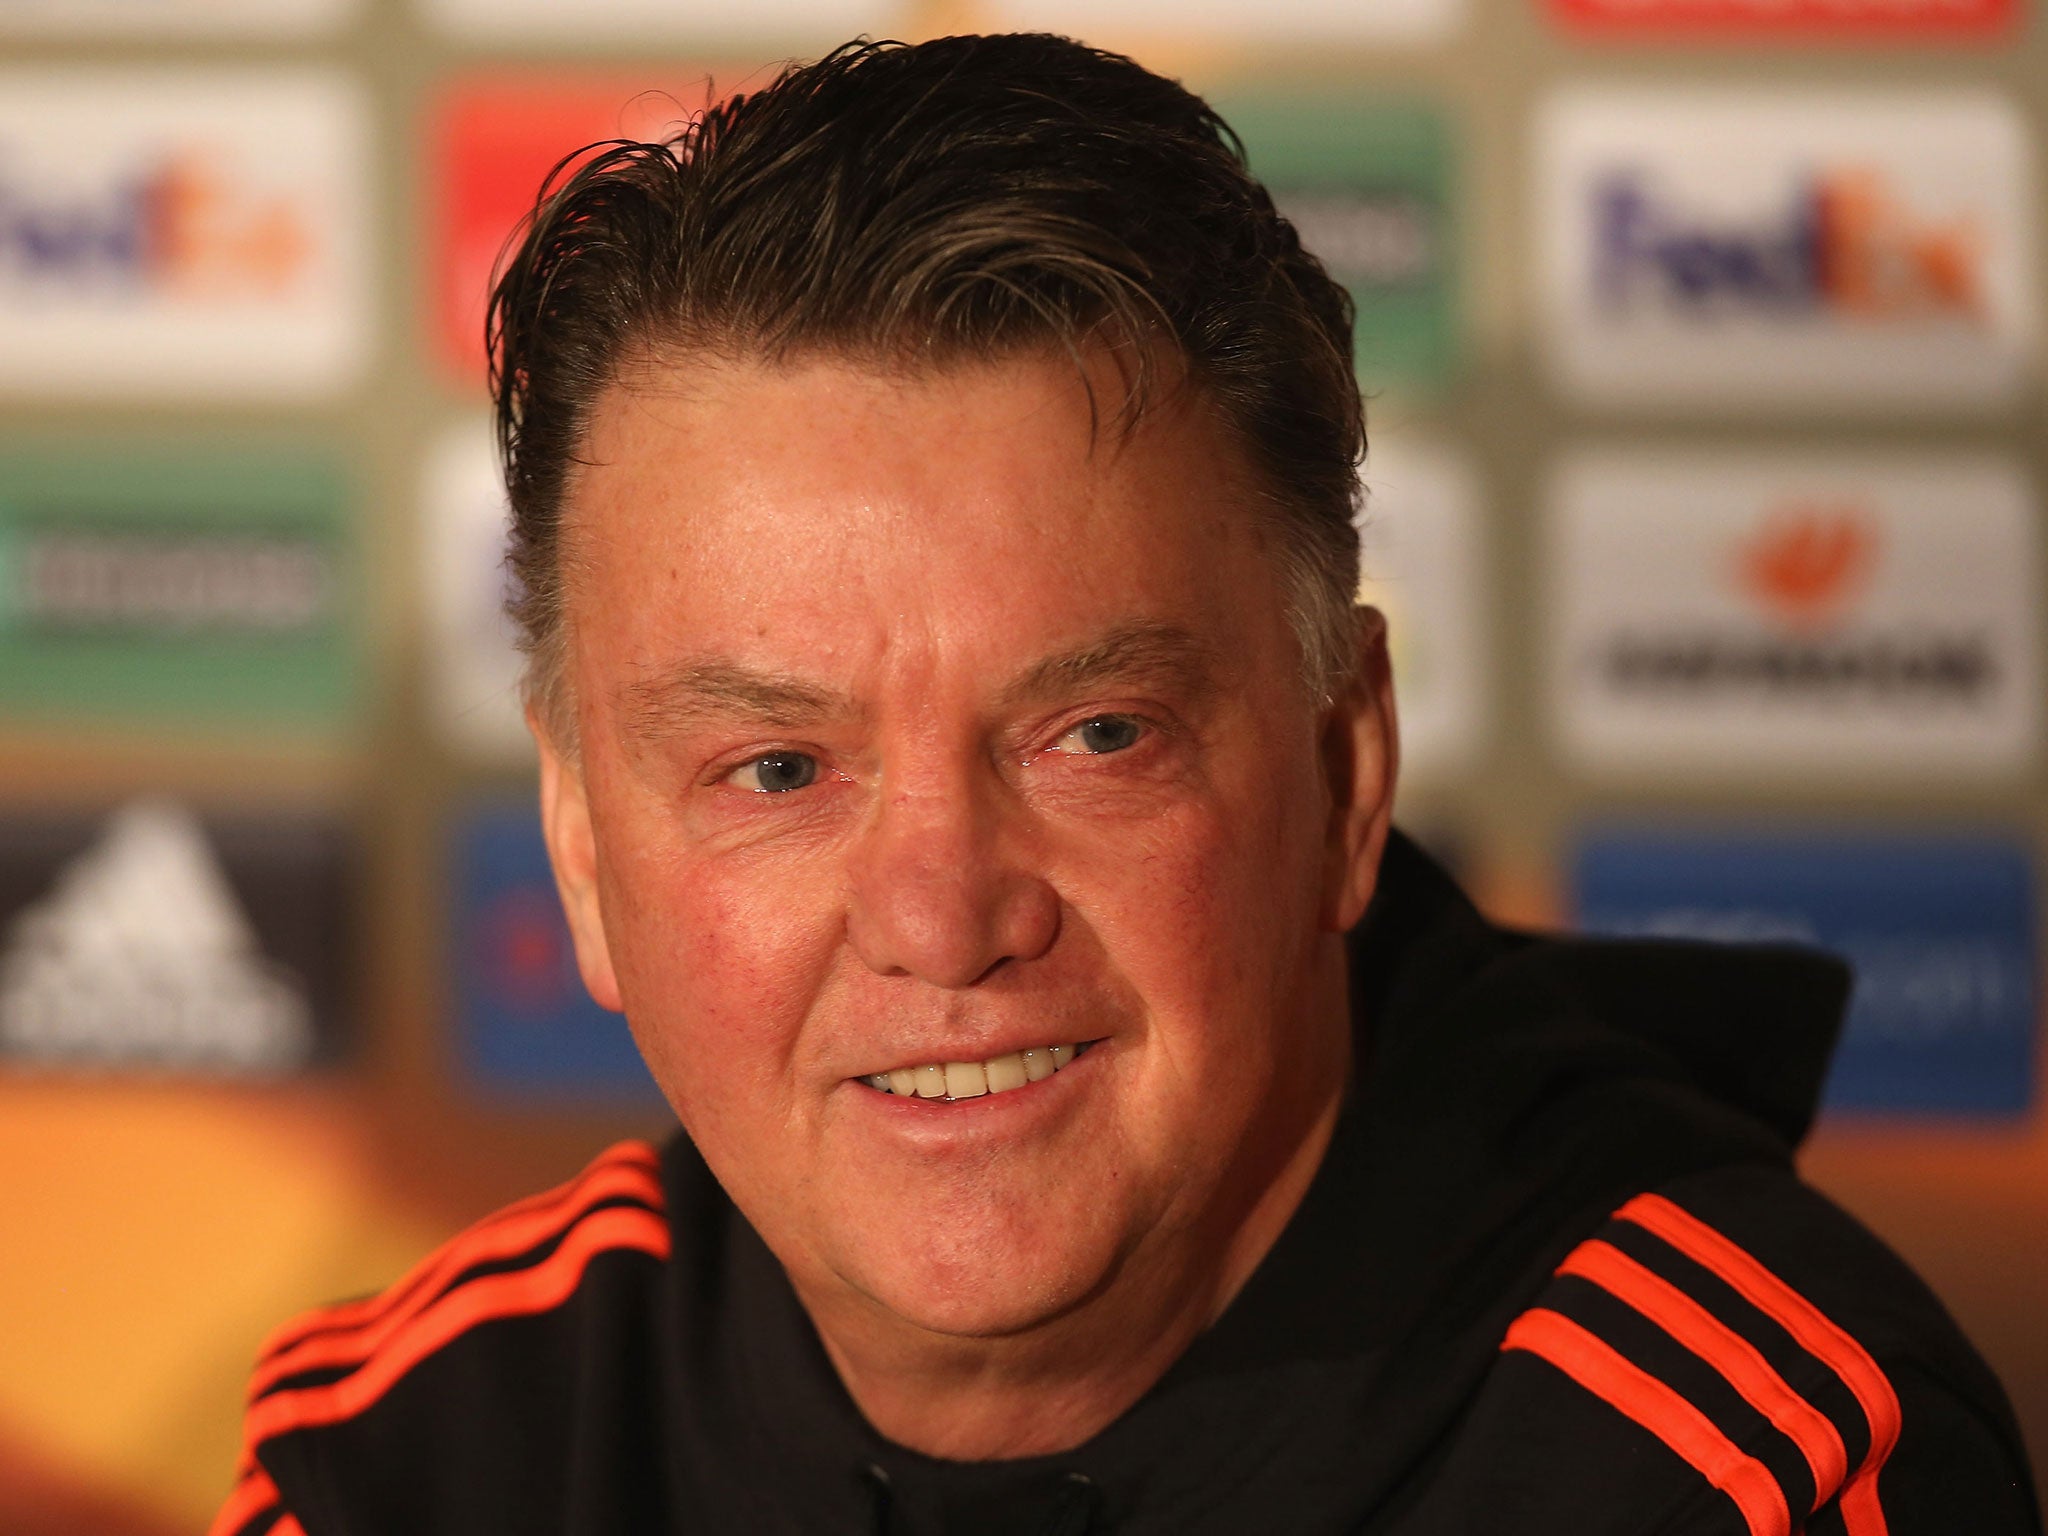 Louis van Gaal has backed Manchester United fans planning to protest against ticket prices